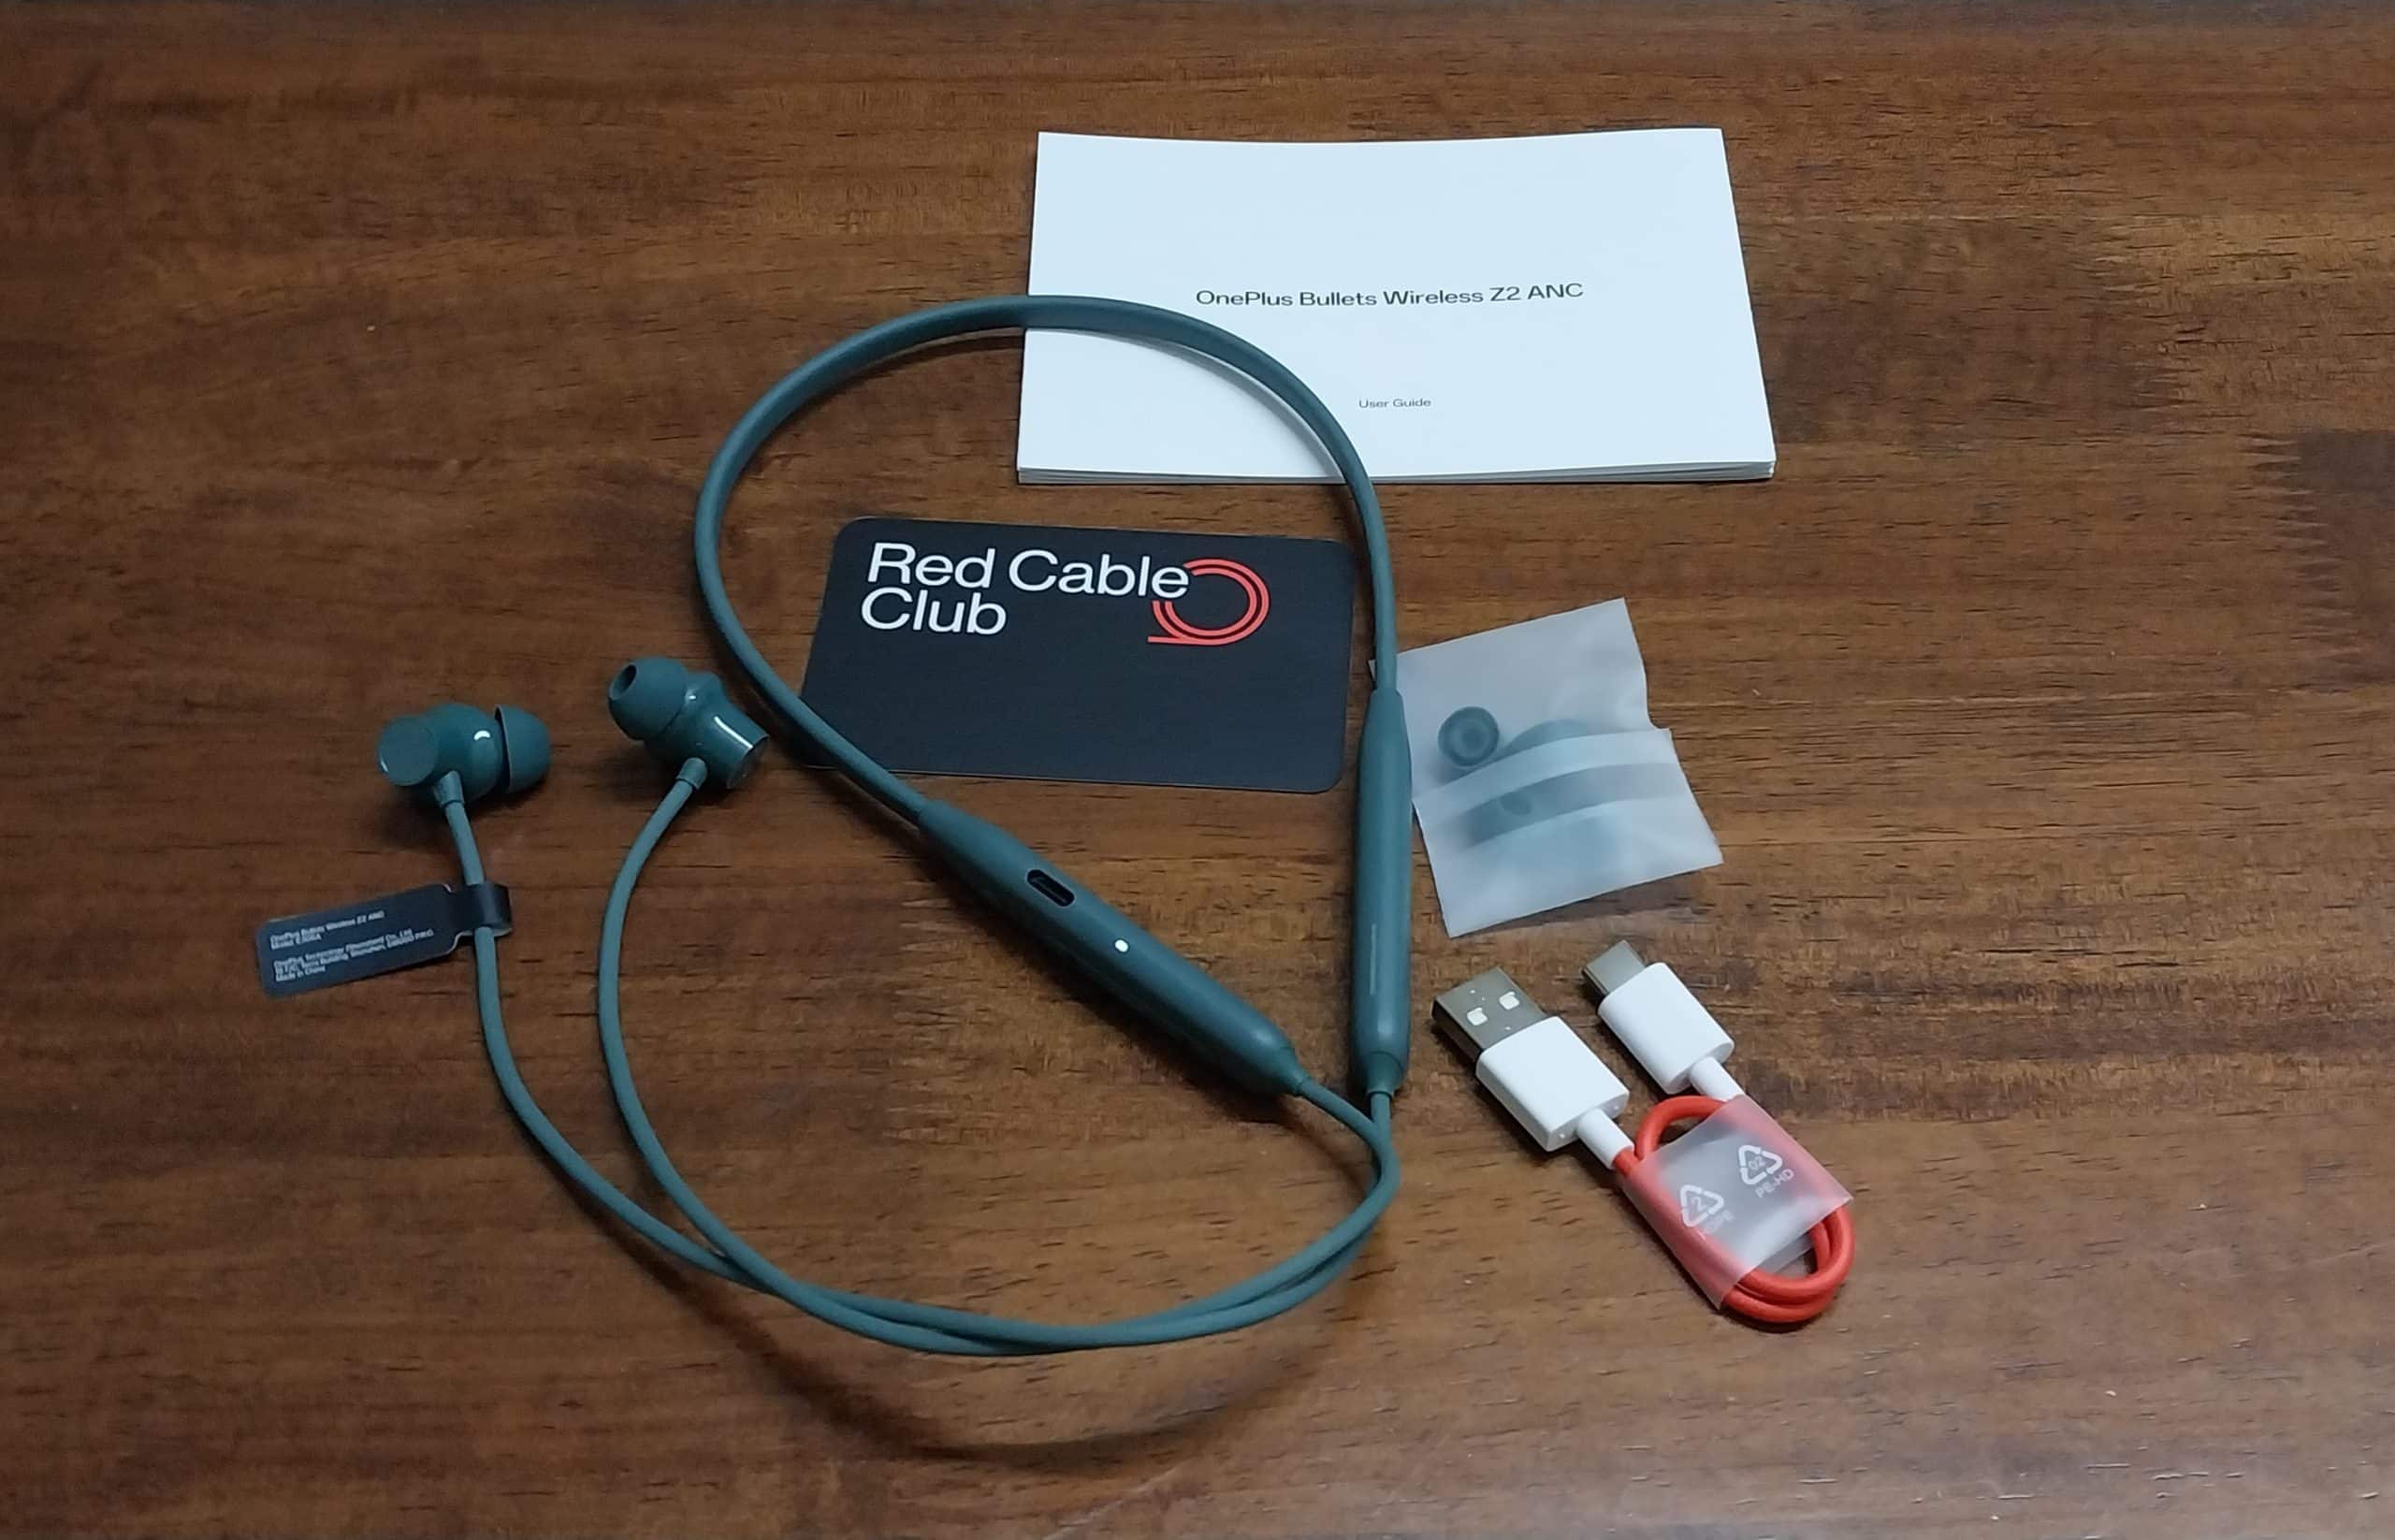 OnePlus Bullets Wireless Z2 ANC - Features